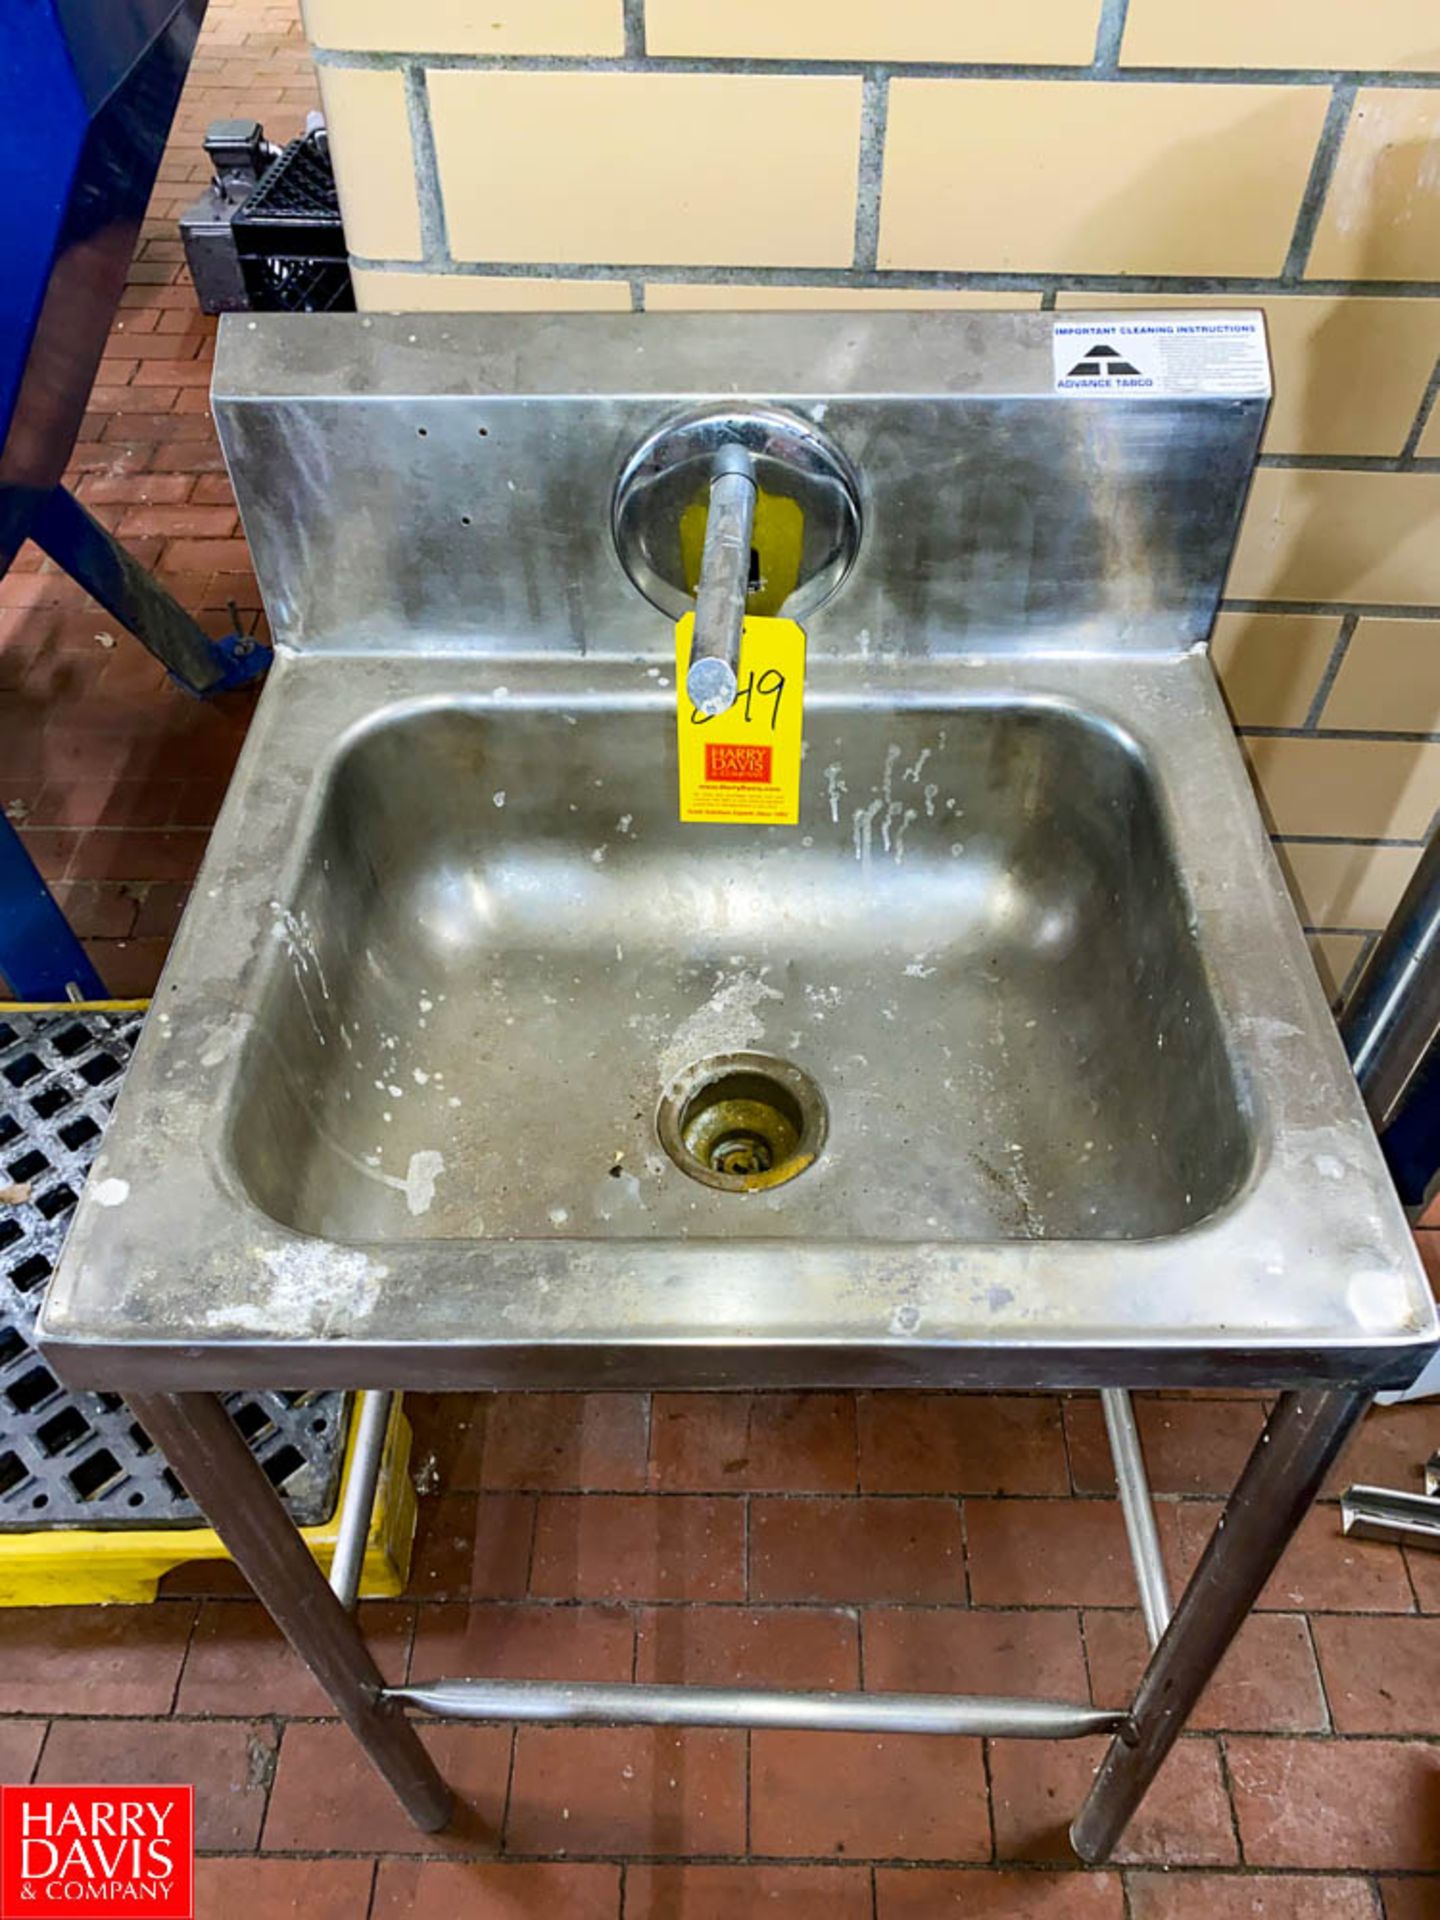 S/S Automated Control Hand Sink - Rigging Fee $50